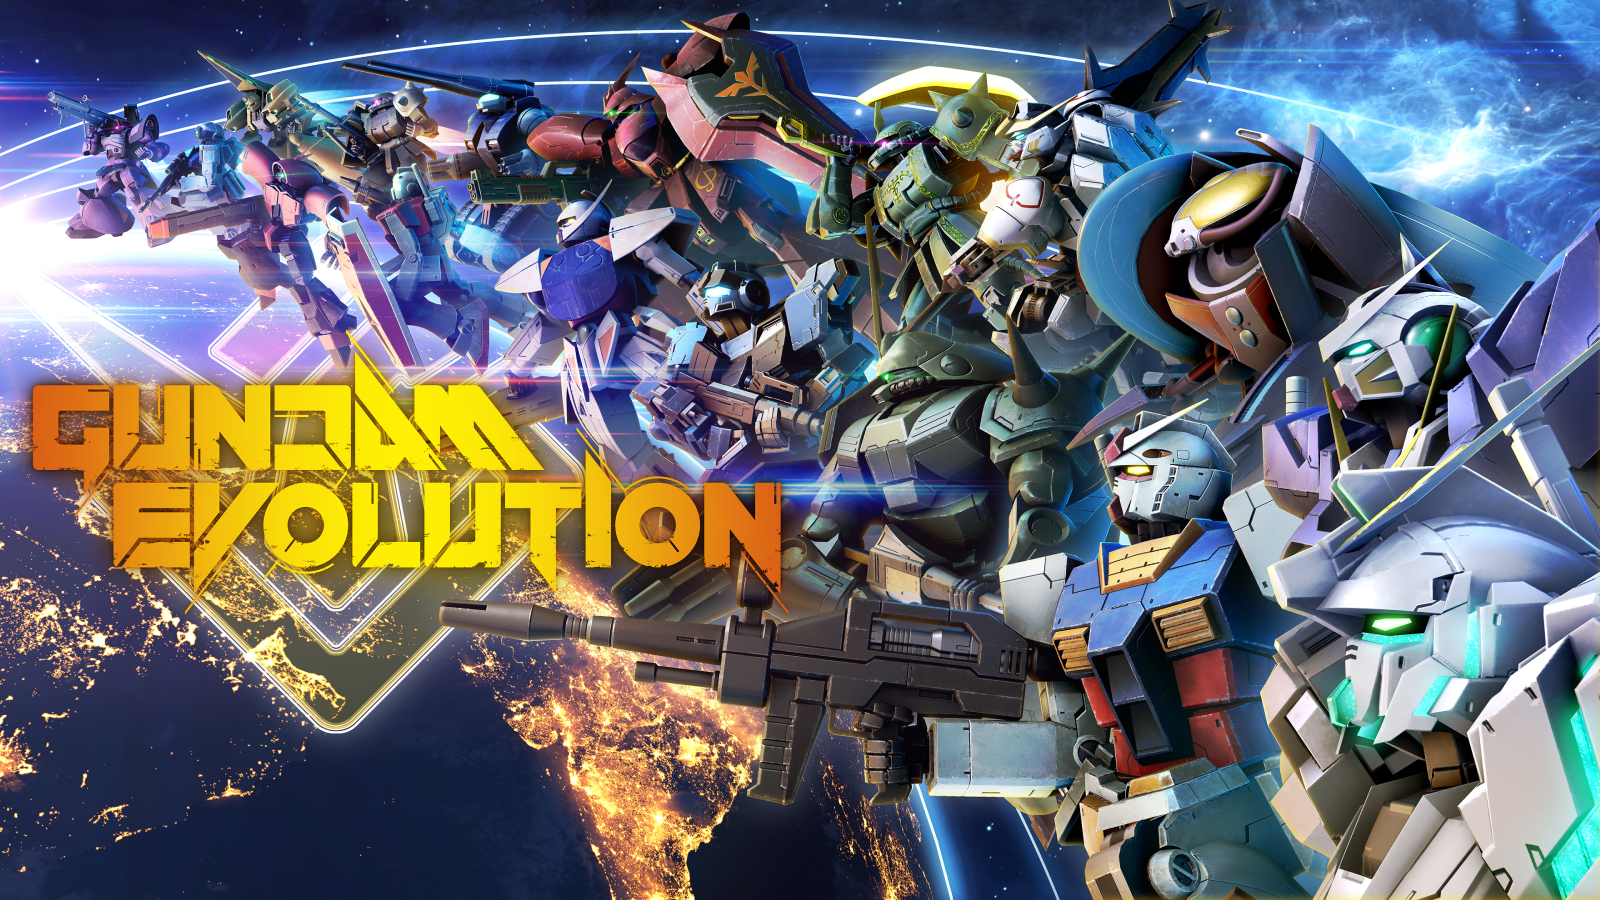 Gundam Evolution free-to-play hero shooter launches in September on Steam |  